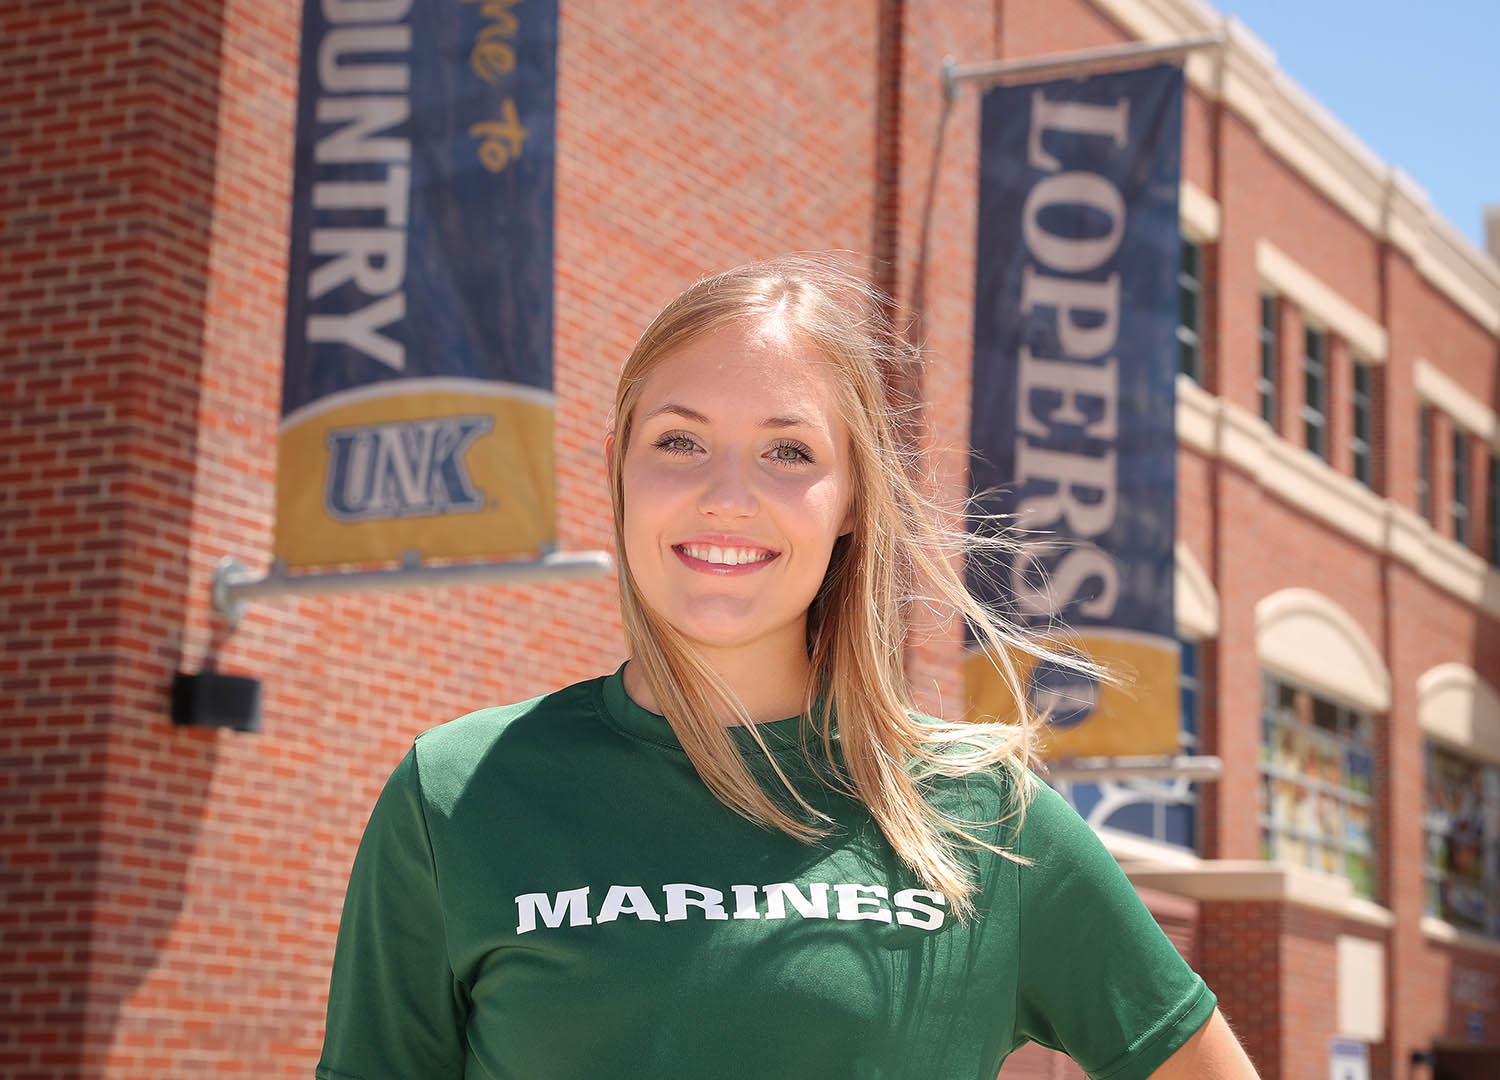 Inspired by her family’s military legacy, UNK student Emily Petersen made the decision last fall to apply for the Marine Corps Officer Candidates School. Her father, grandfather and grandmother all served in the Marines. (Photos by Corbey R. Dorsey, UNK Communications)